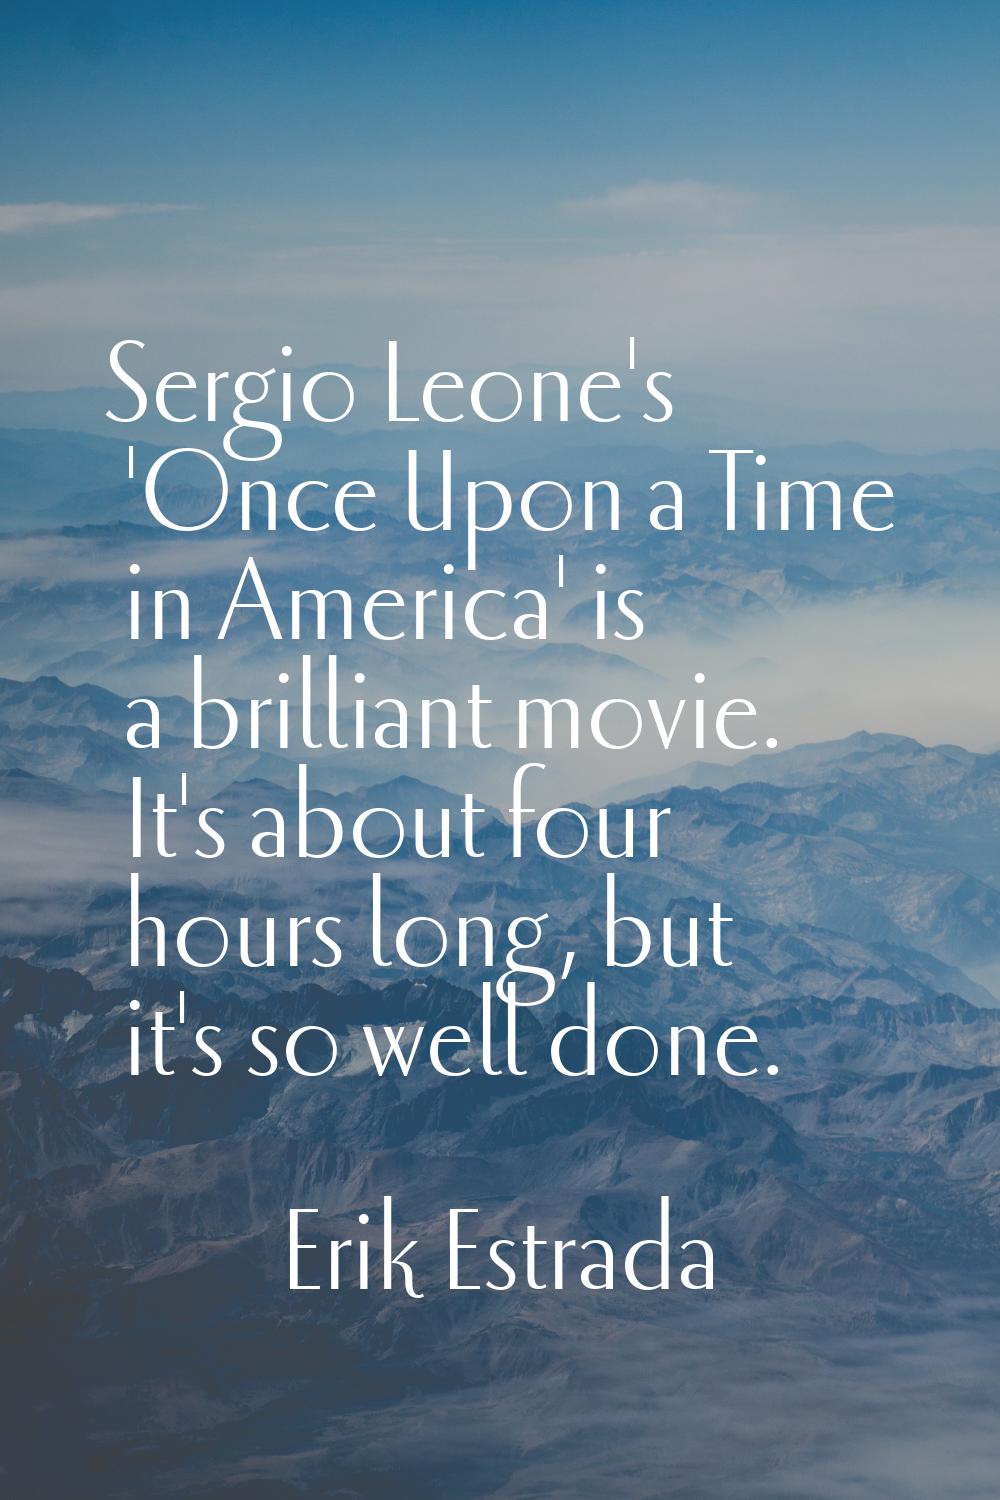 Sergio Leone's 'Once Upon a Time in America' is a brilliant movie. It's about four hours long, but 